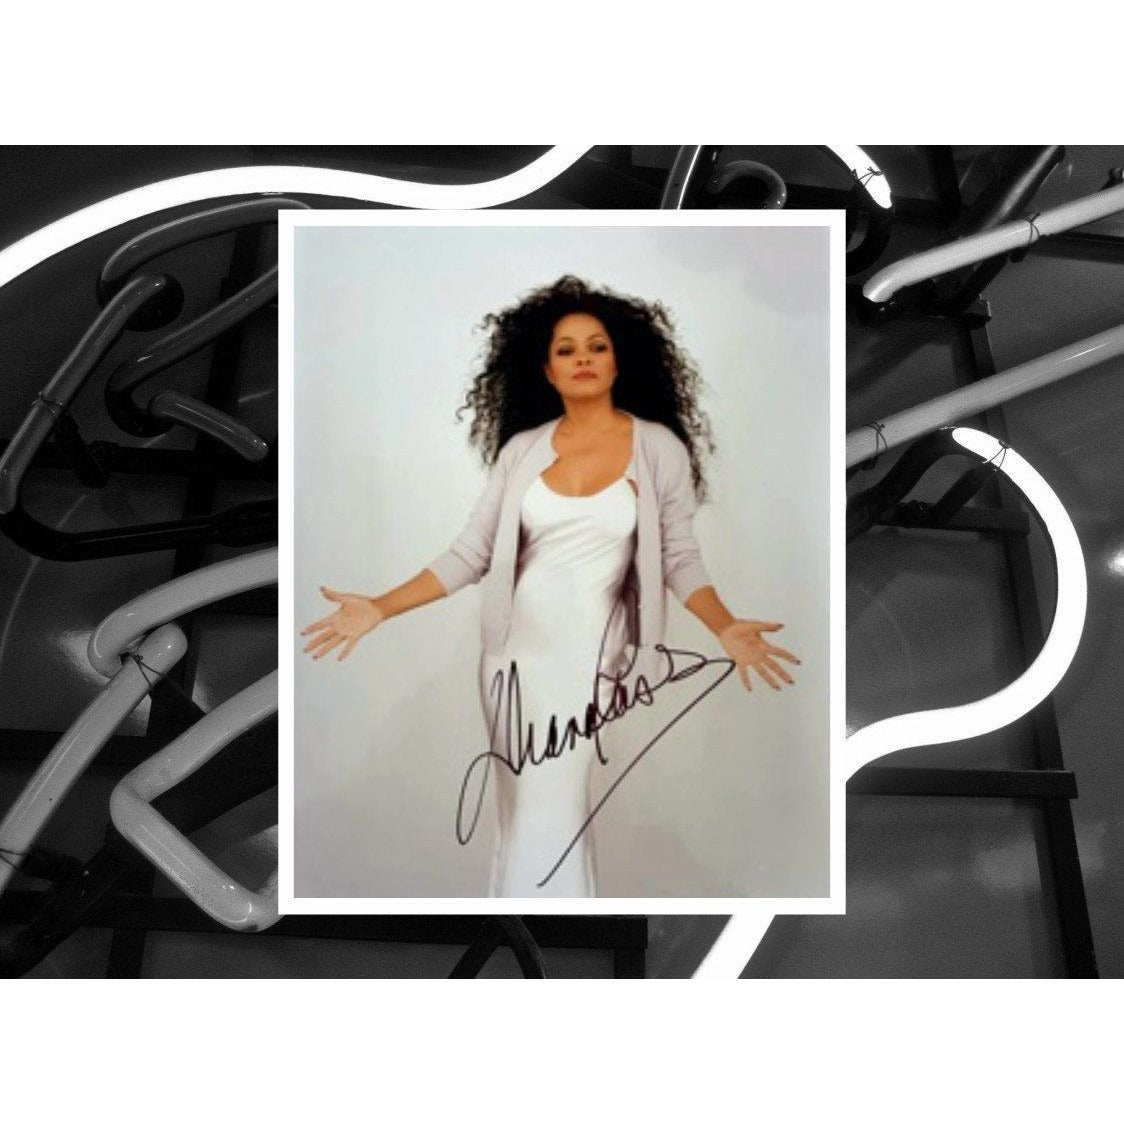 Diana Ross 8x10 photo signed with proof